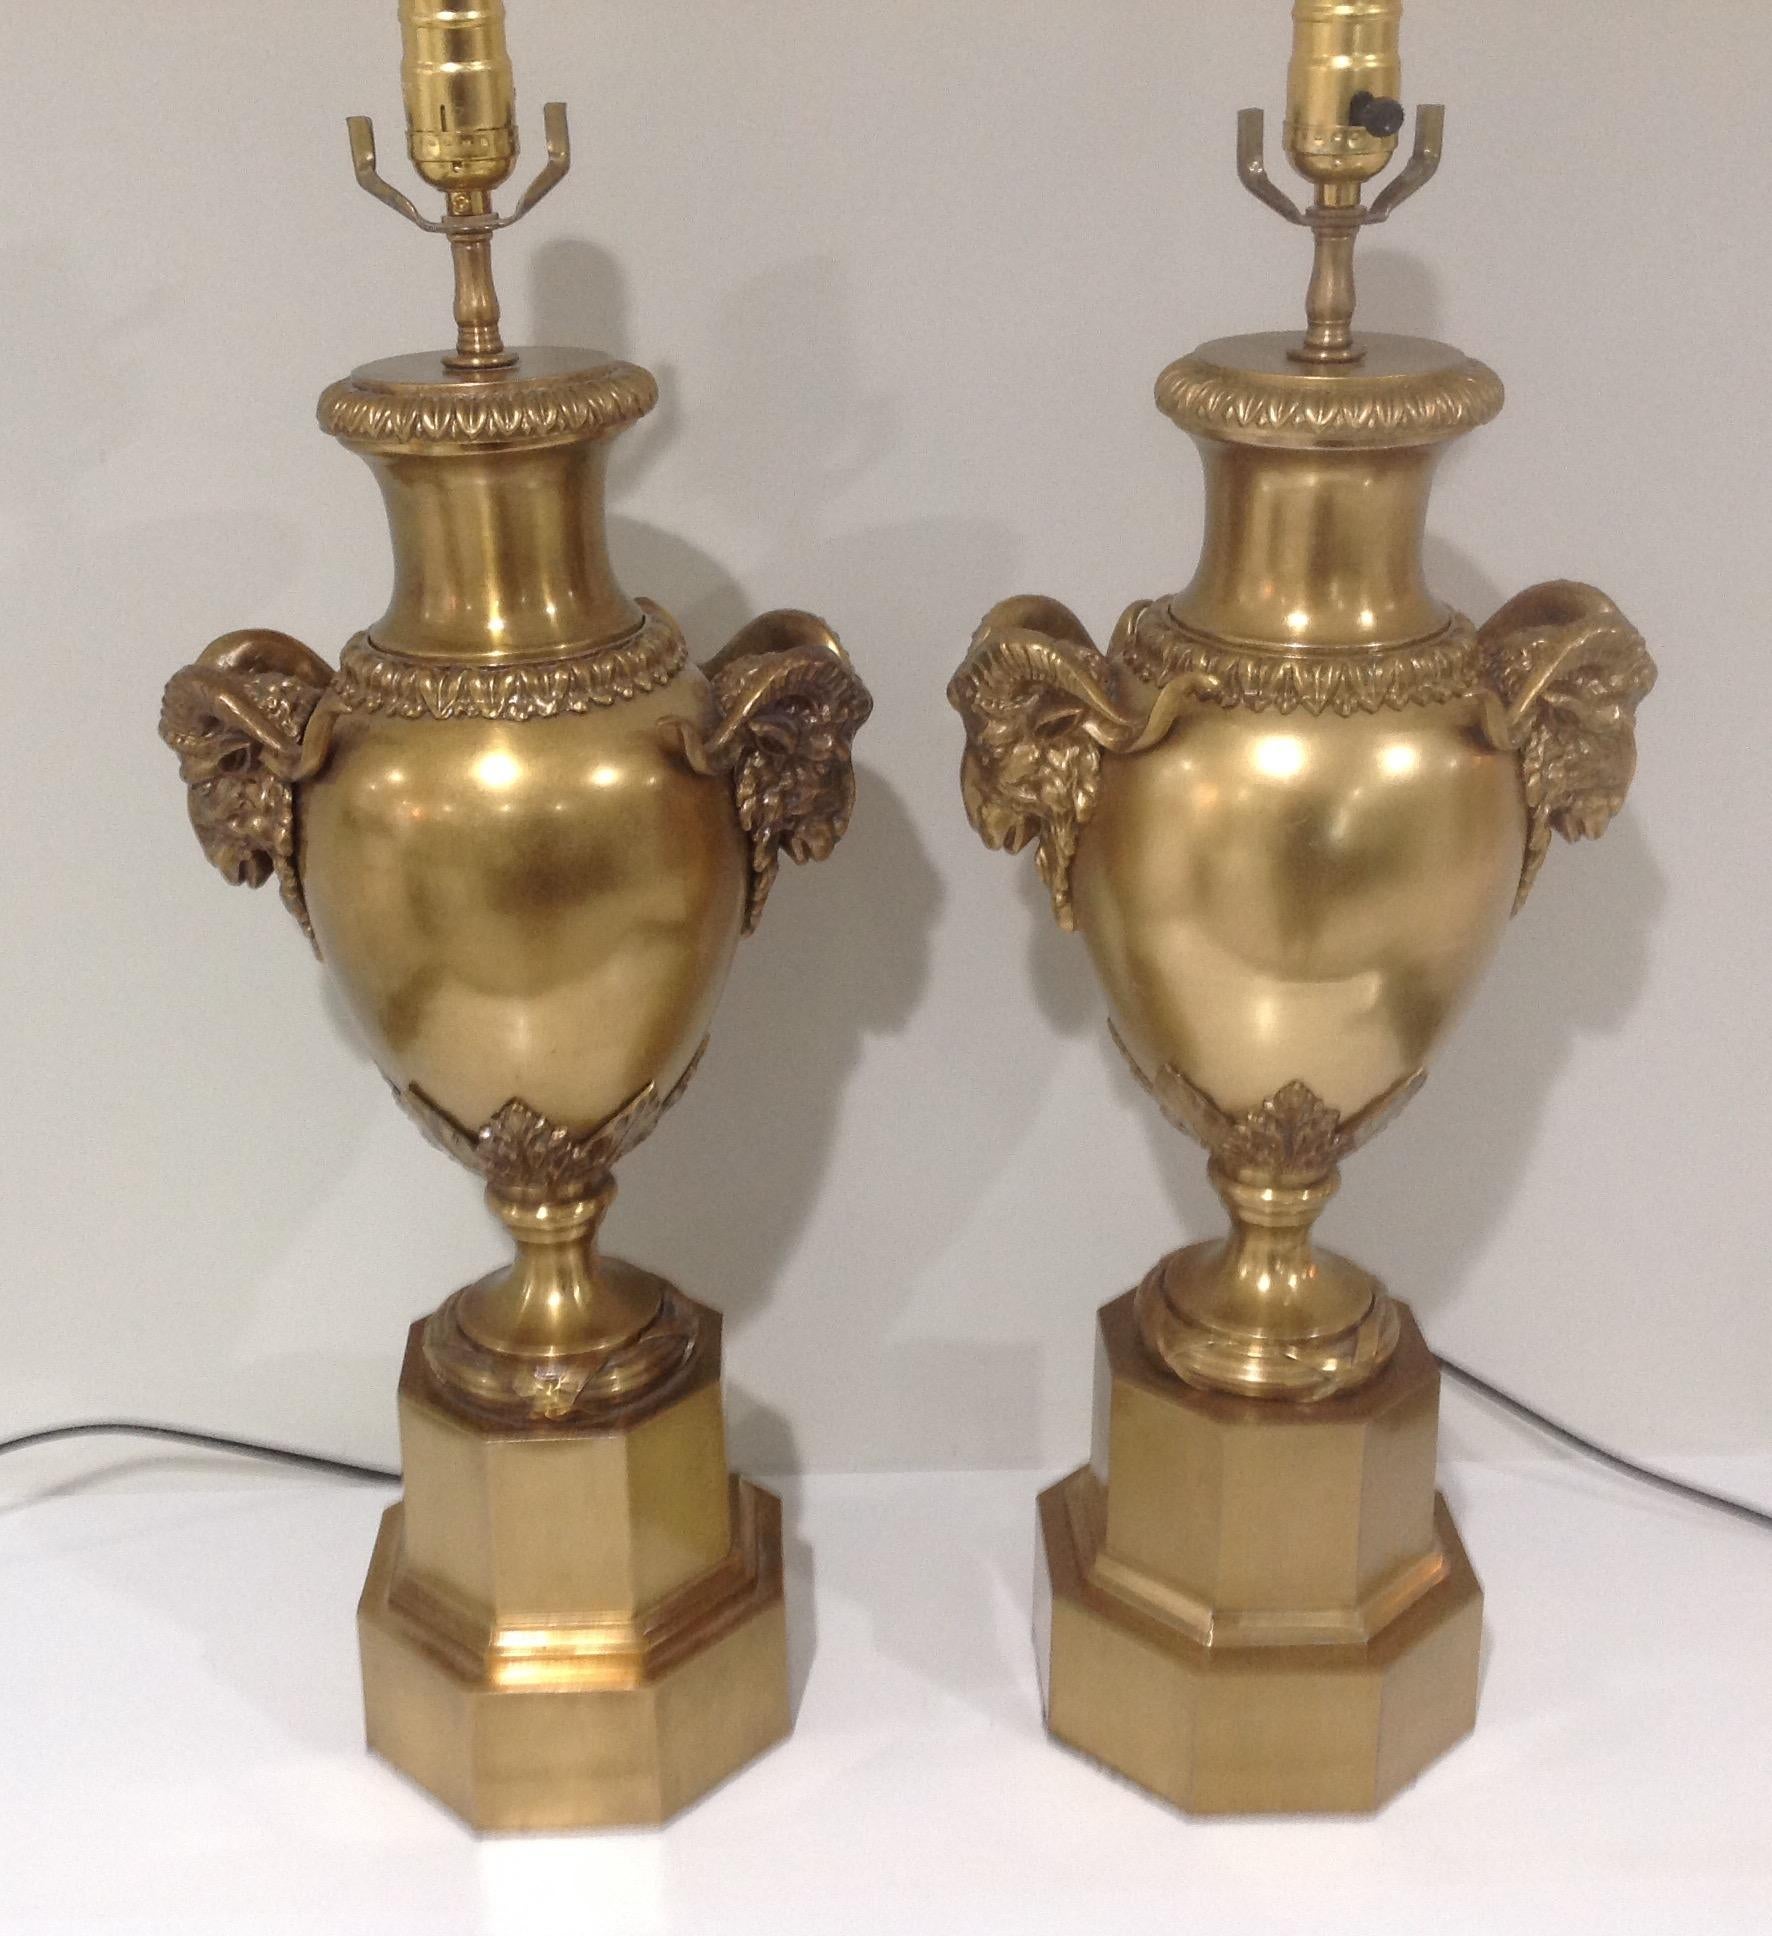 Amazing pair of Maitland Smith lamps with applies rams head decoration. Very stylish and decorative pieces that would enhance any high end interior. 

For over four decades, Maitland-Smith has been creating exquisite and unique decorative